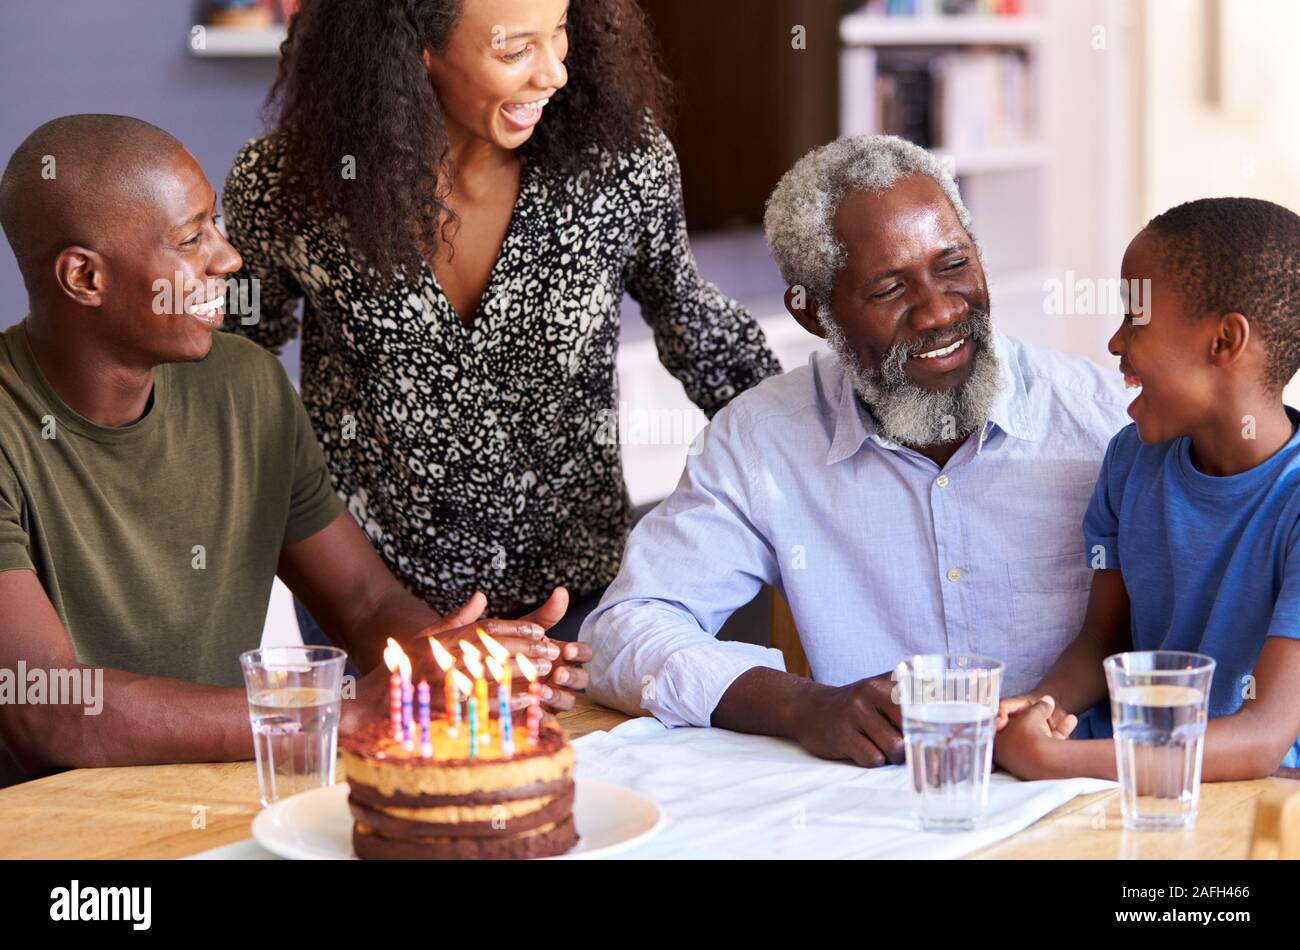 Multi-Generation Family Celebrating Grandfathers Birthday At Home With Cake And Candles Stock Photo